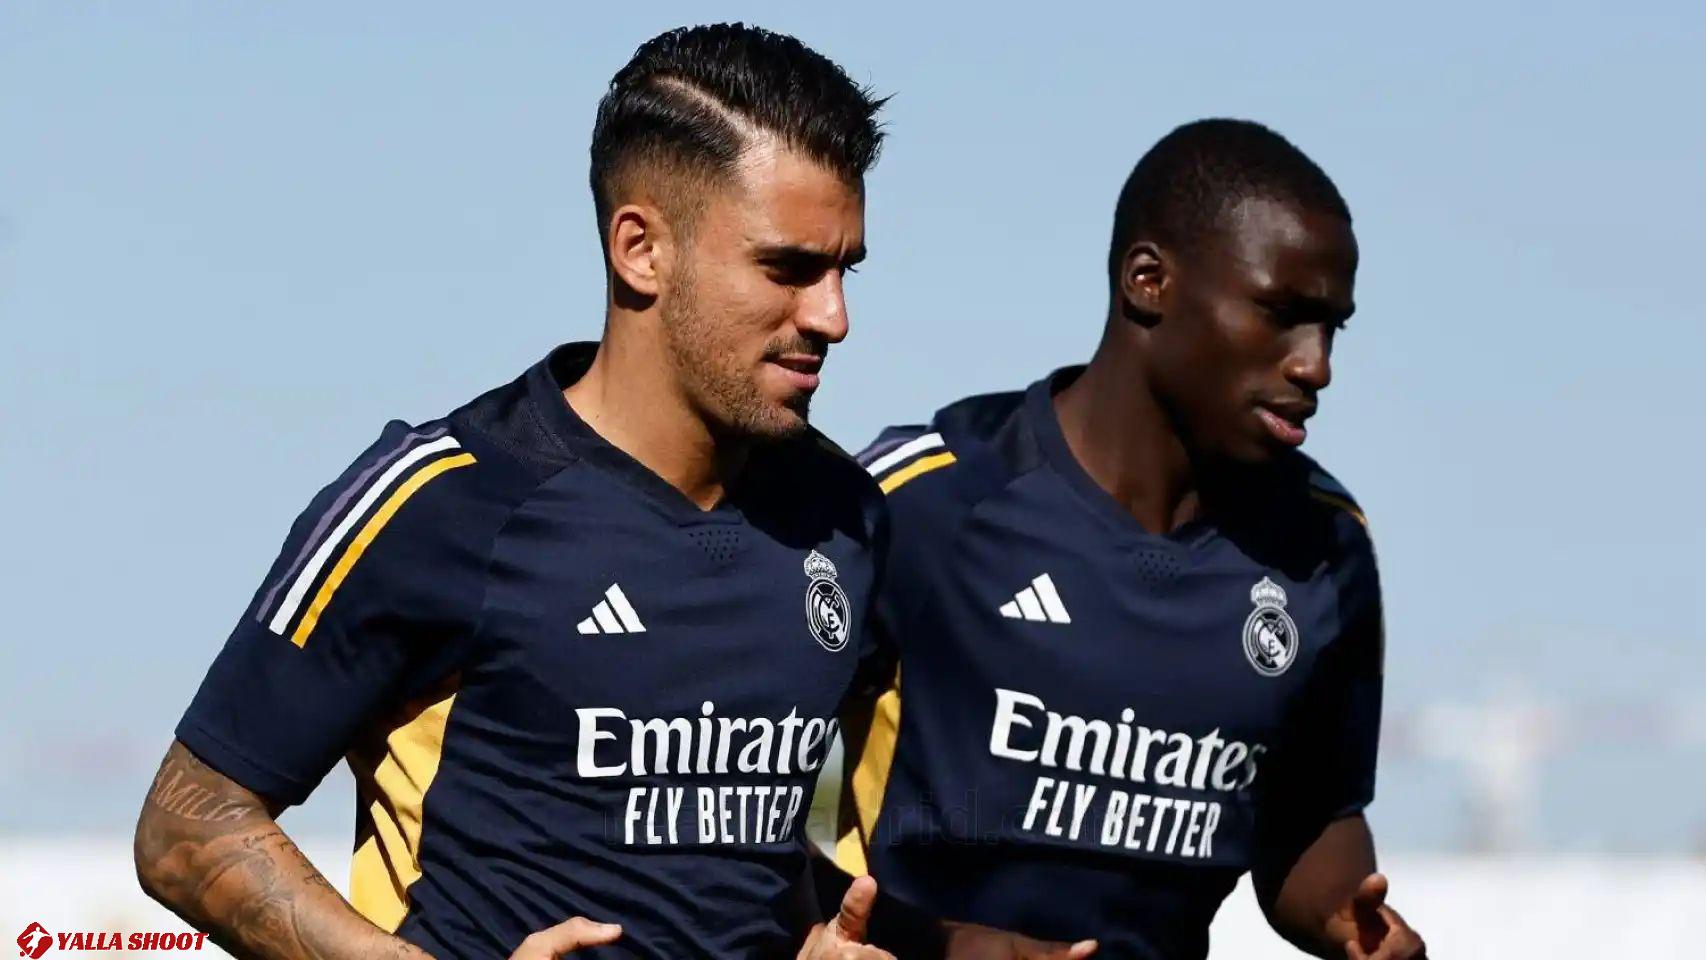 Real Madrid transfer plan "on track" as defender raises his value ahead of departure next summer